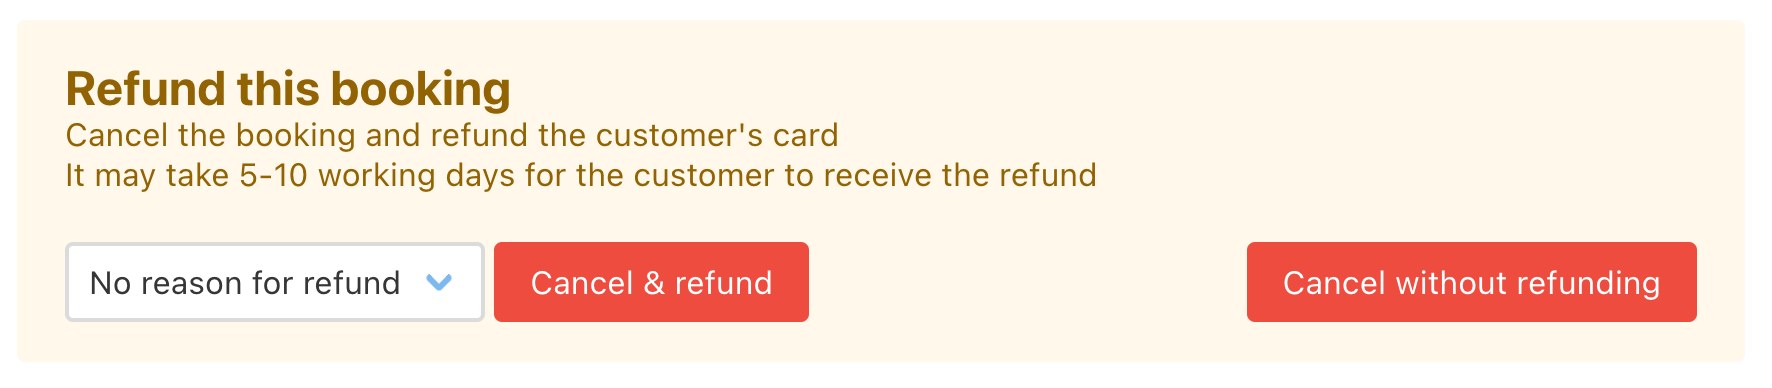 Booking refund options